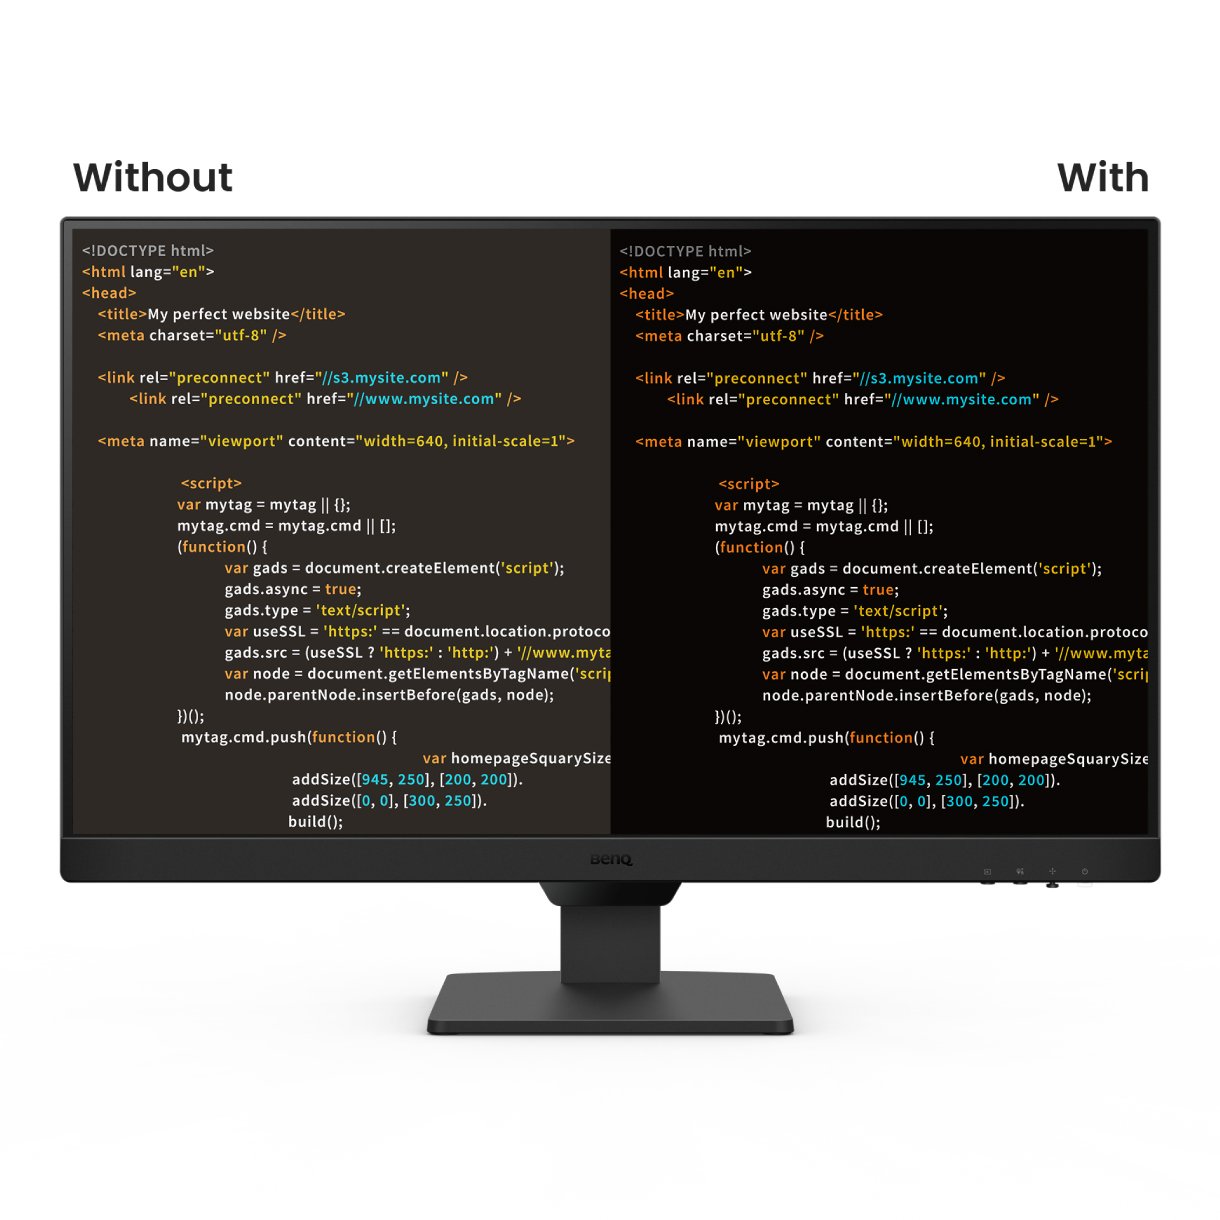 GW2790 comes with coding mode is designed to make every color stand out for easy readability with optimized contrast and saturation of dark mode